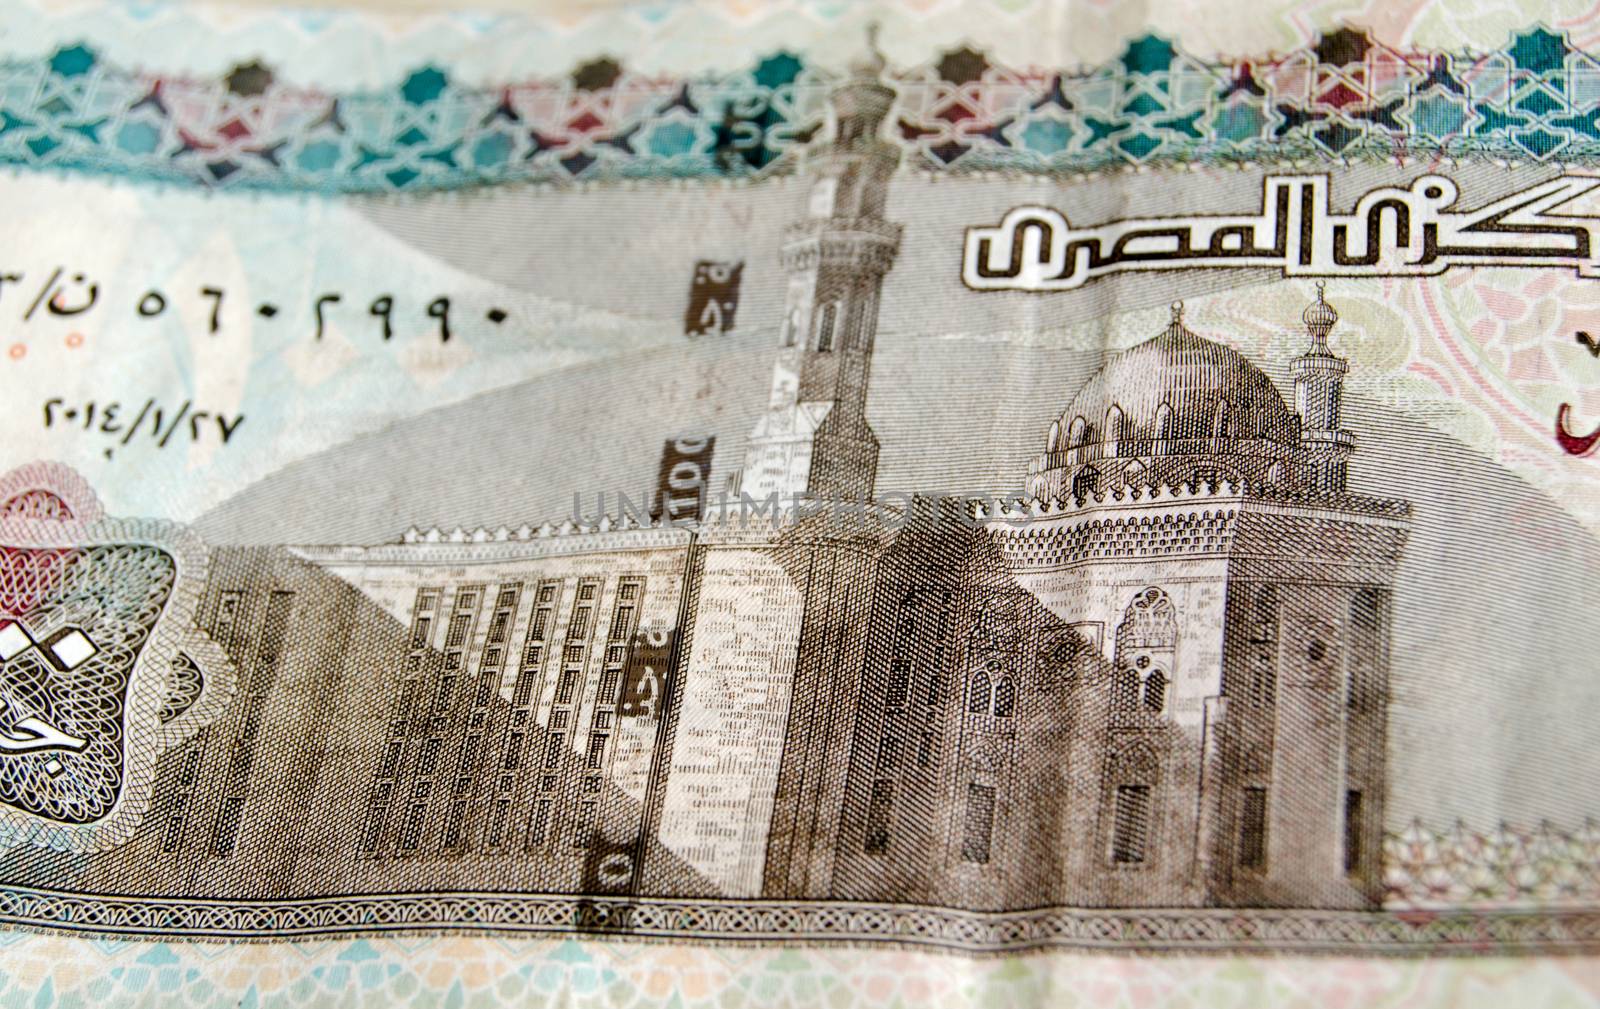 Detail of the Sultan Hassan Mosque in Cairo as depicted on the 100 Egyptian Pound banknote.  Used banknote, photographed at an angle.  